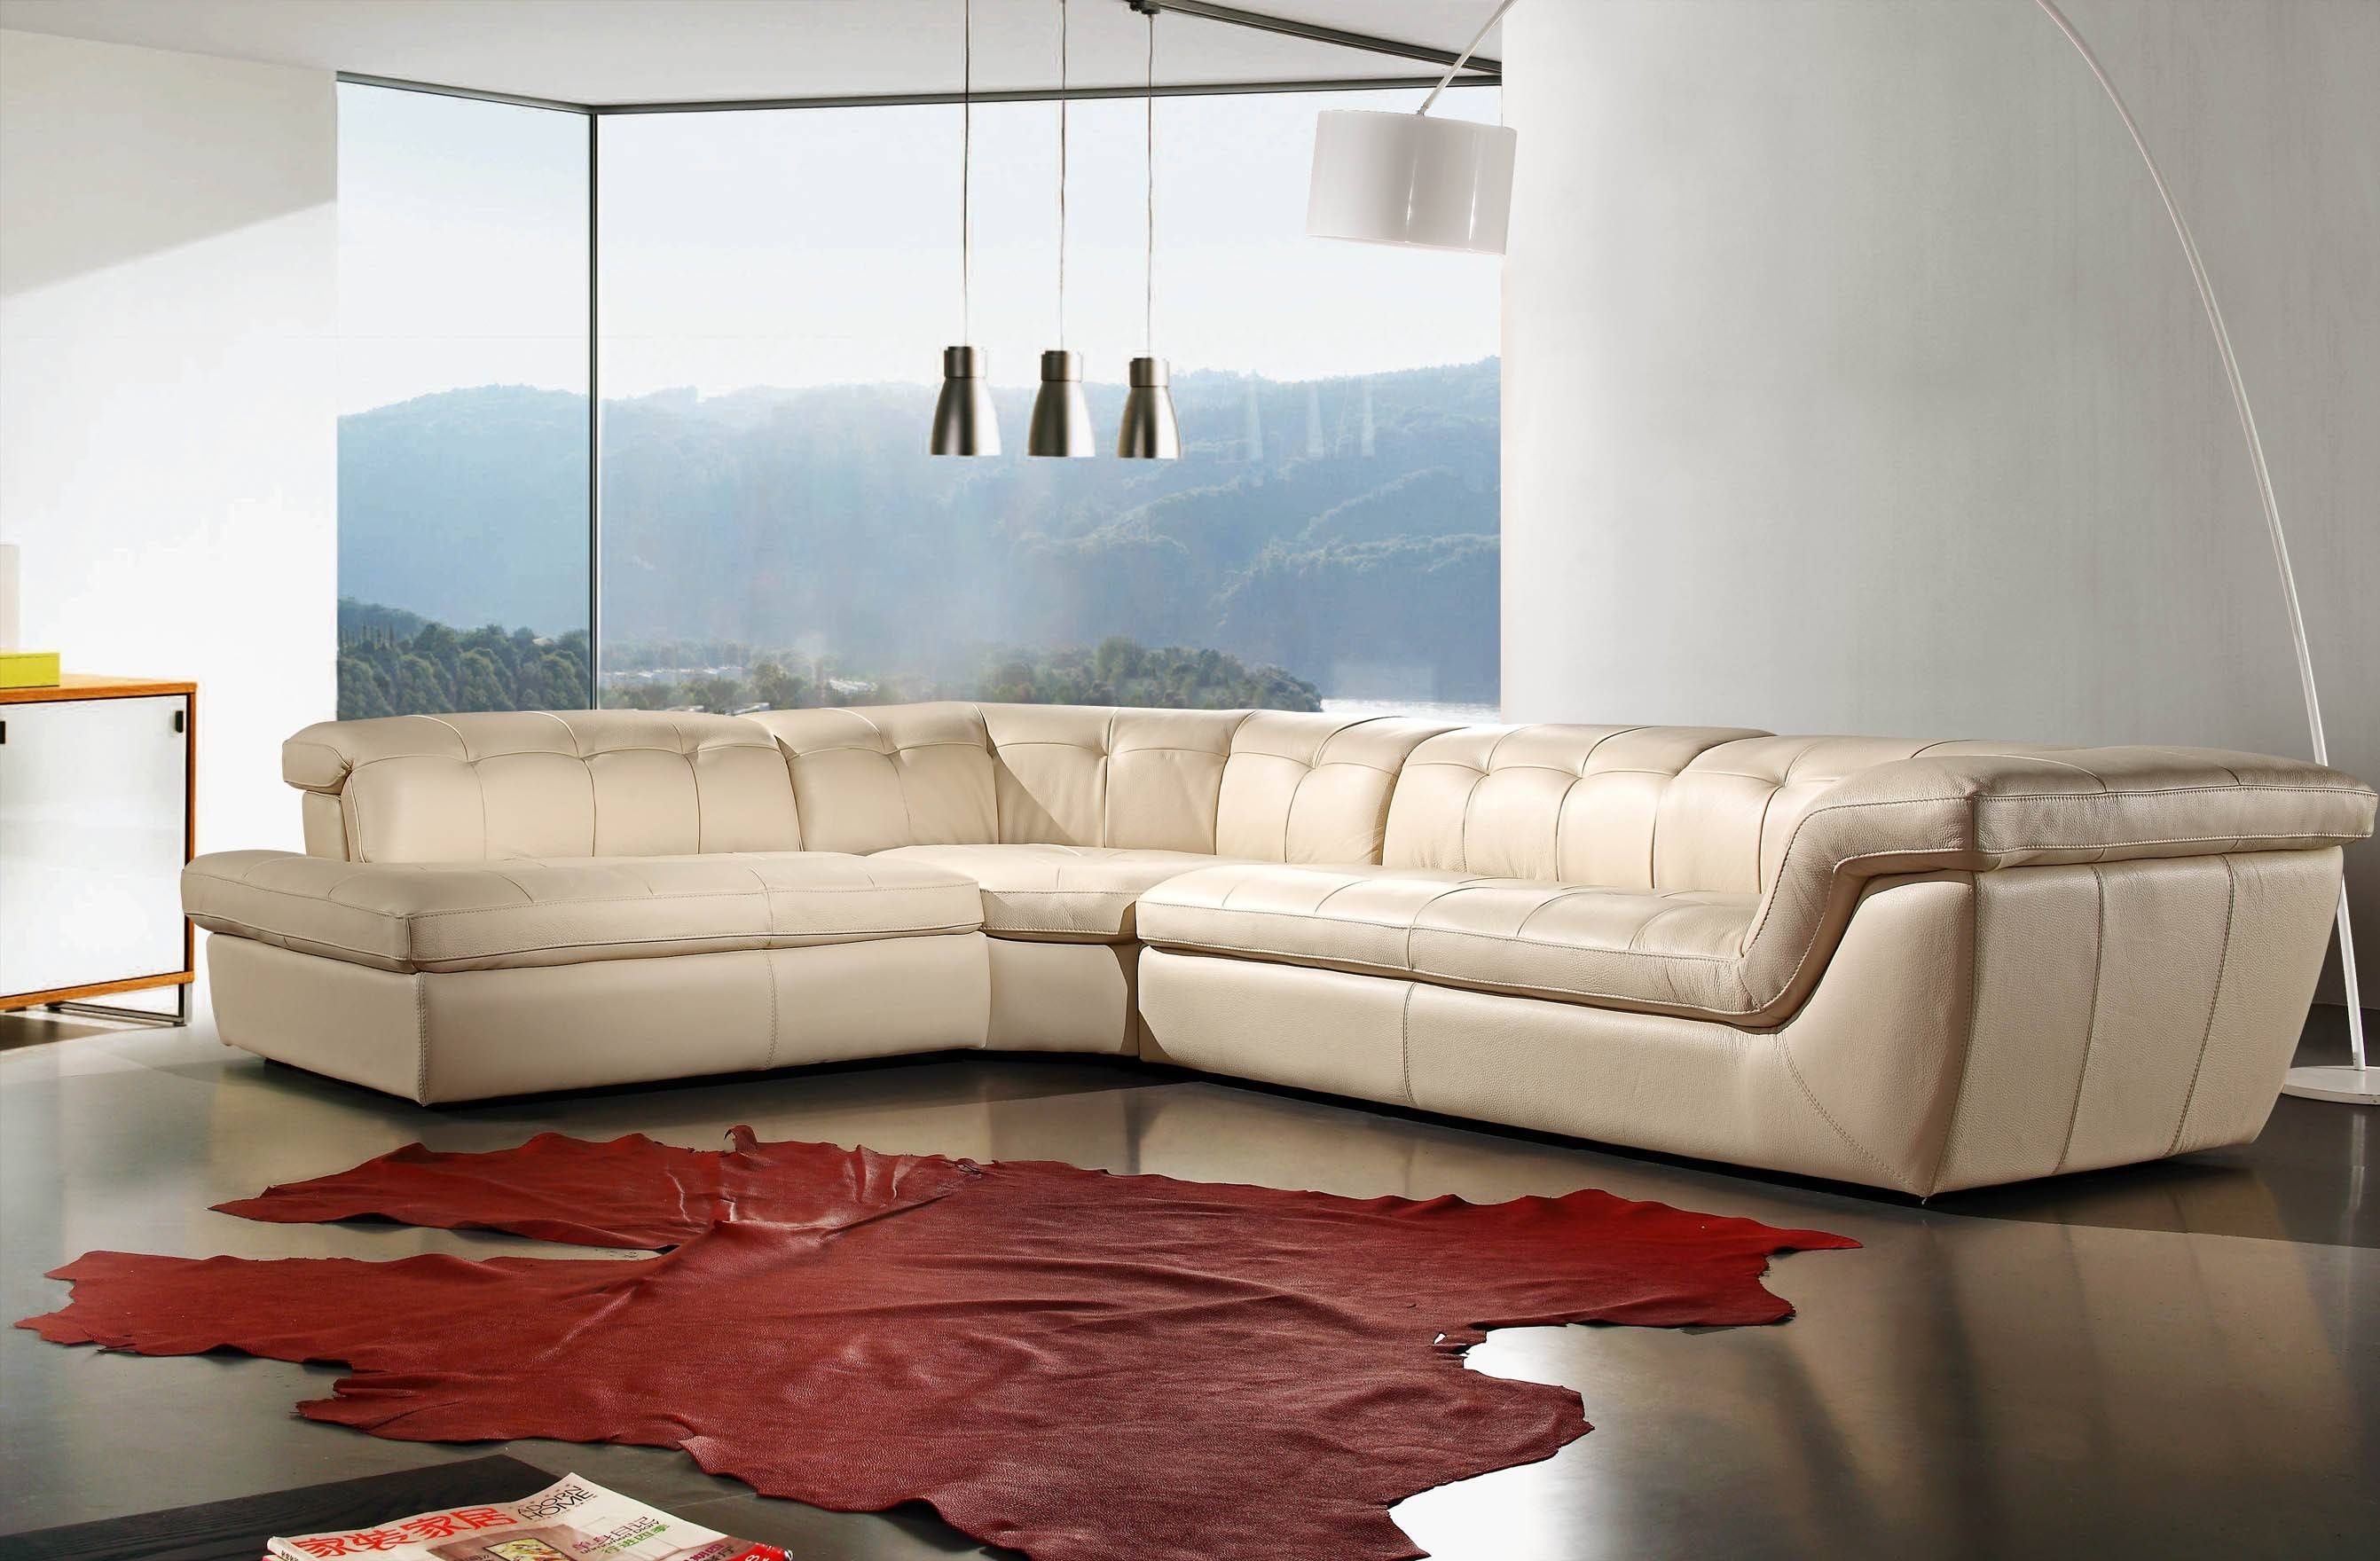 Sectional Sofa Contemporary, Contemporary Sectional Sofas With Regard To Leather Modern Sectional Sofas (View 15 of 15)